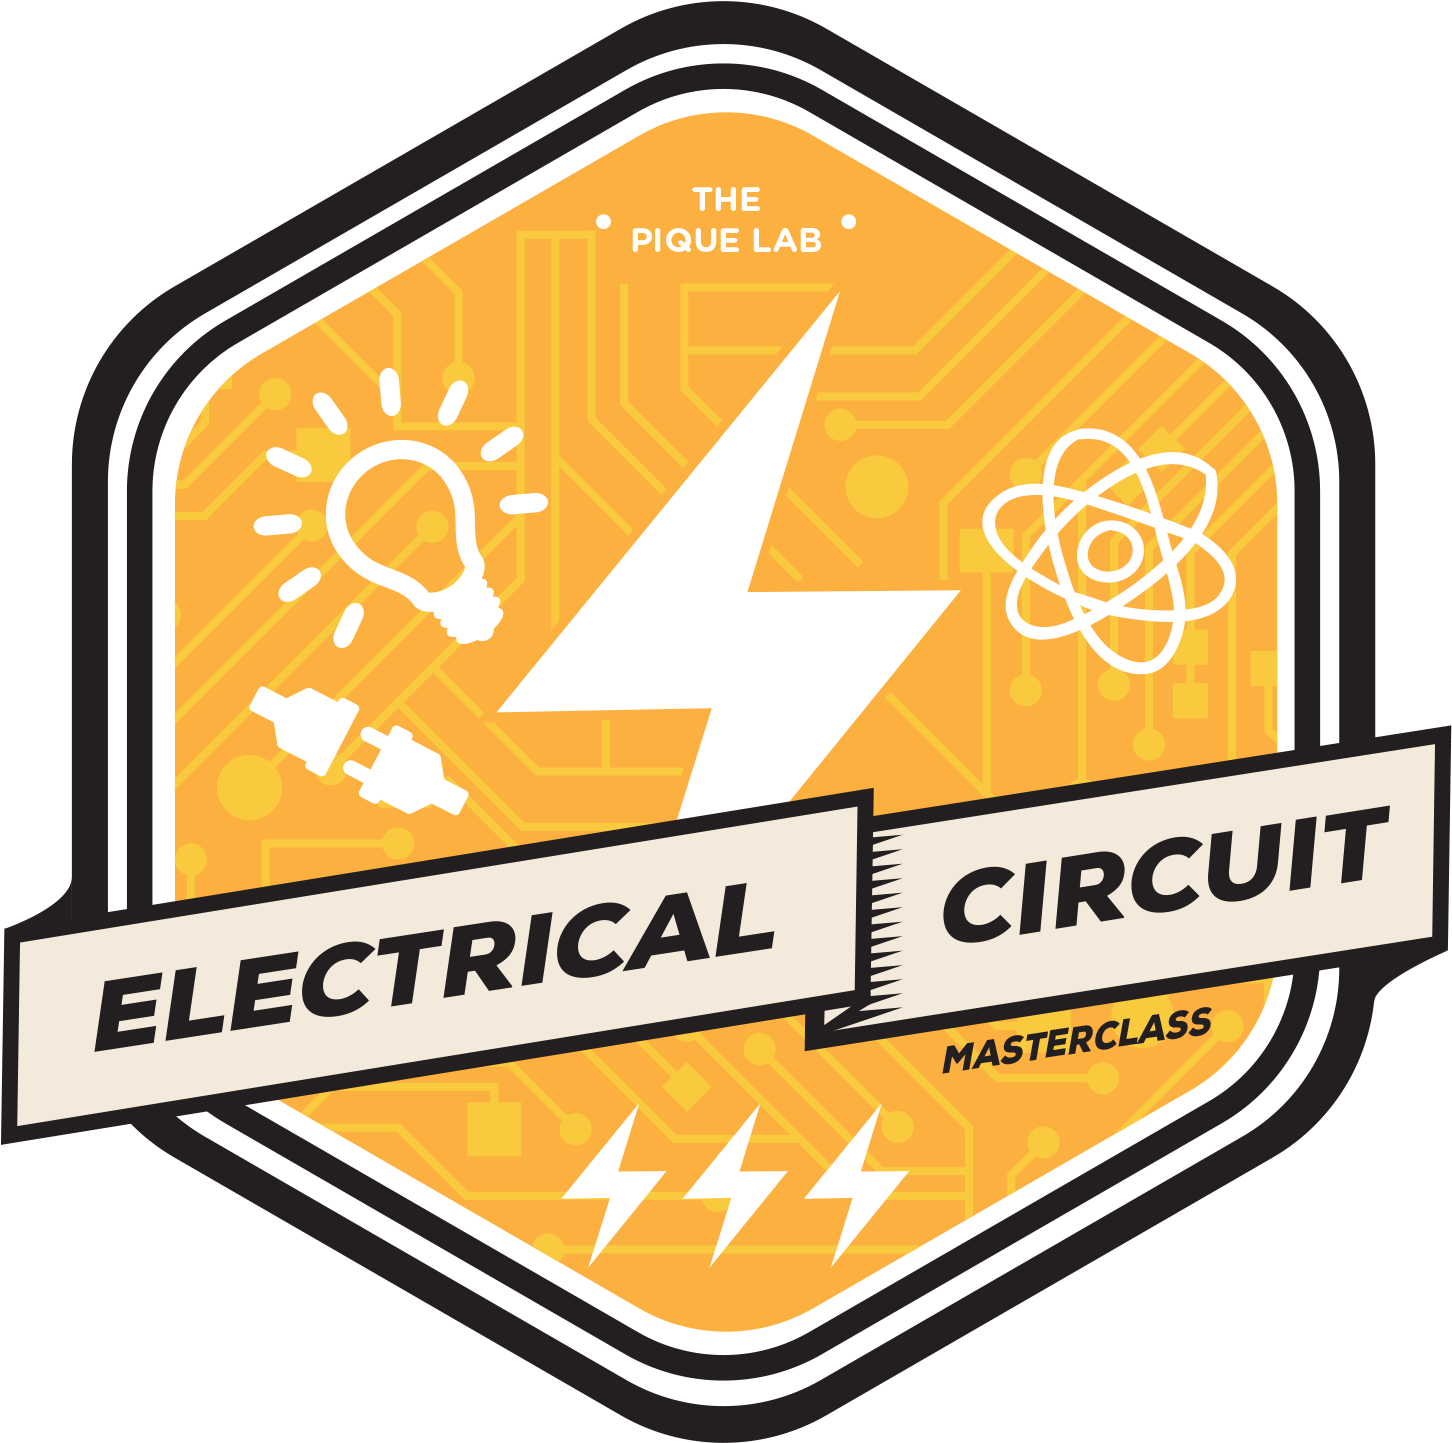 Electrical Circuit Masterclass Conquer Questions Like - Electrical Circuit Masterclass Conquer Questions Like (1481x1472)